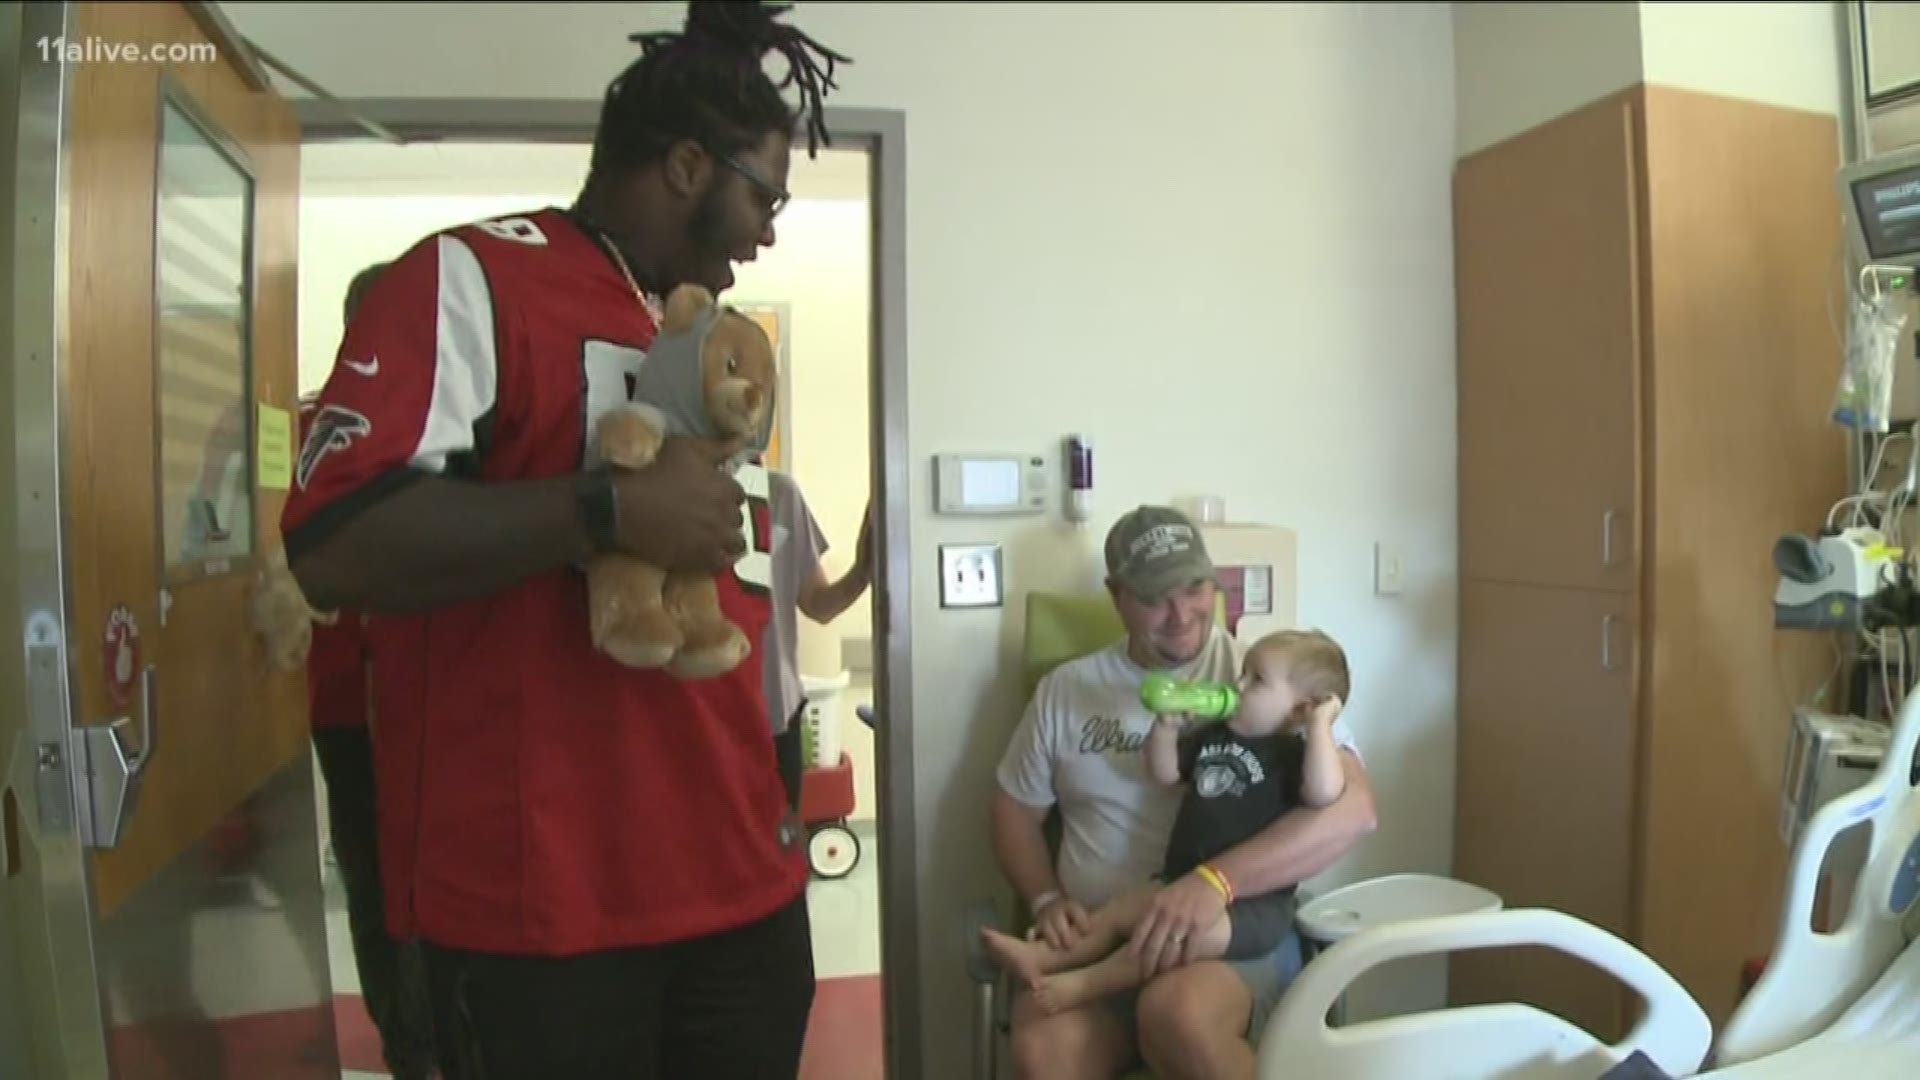 Several players from the Atlanta Falcons, as well as the WWE Superstars brought smiles to patients' faces at Children's Healthcare of Atlanta.